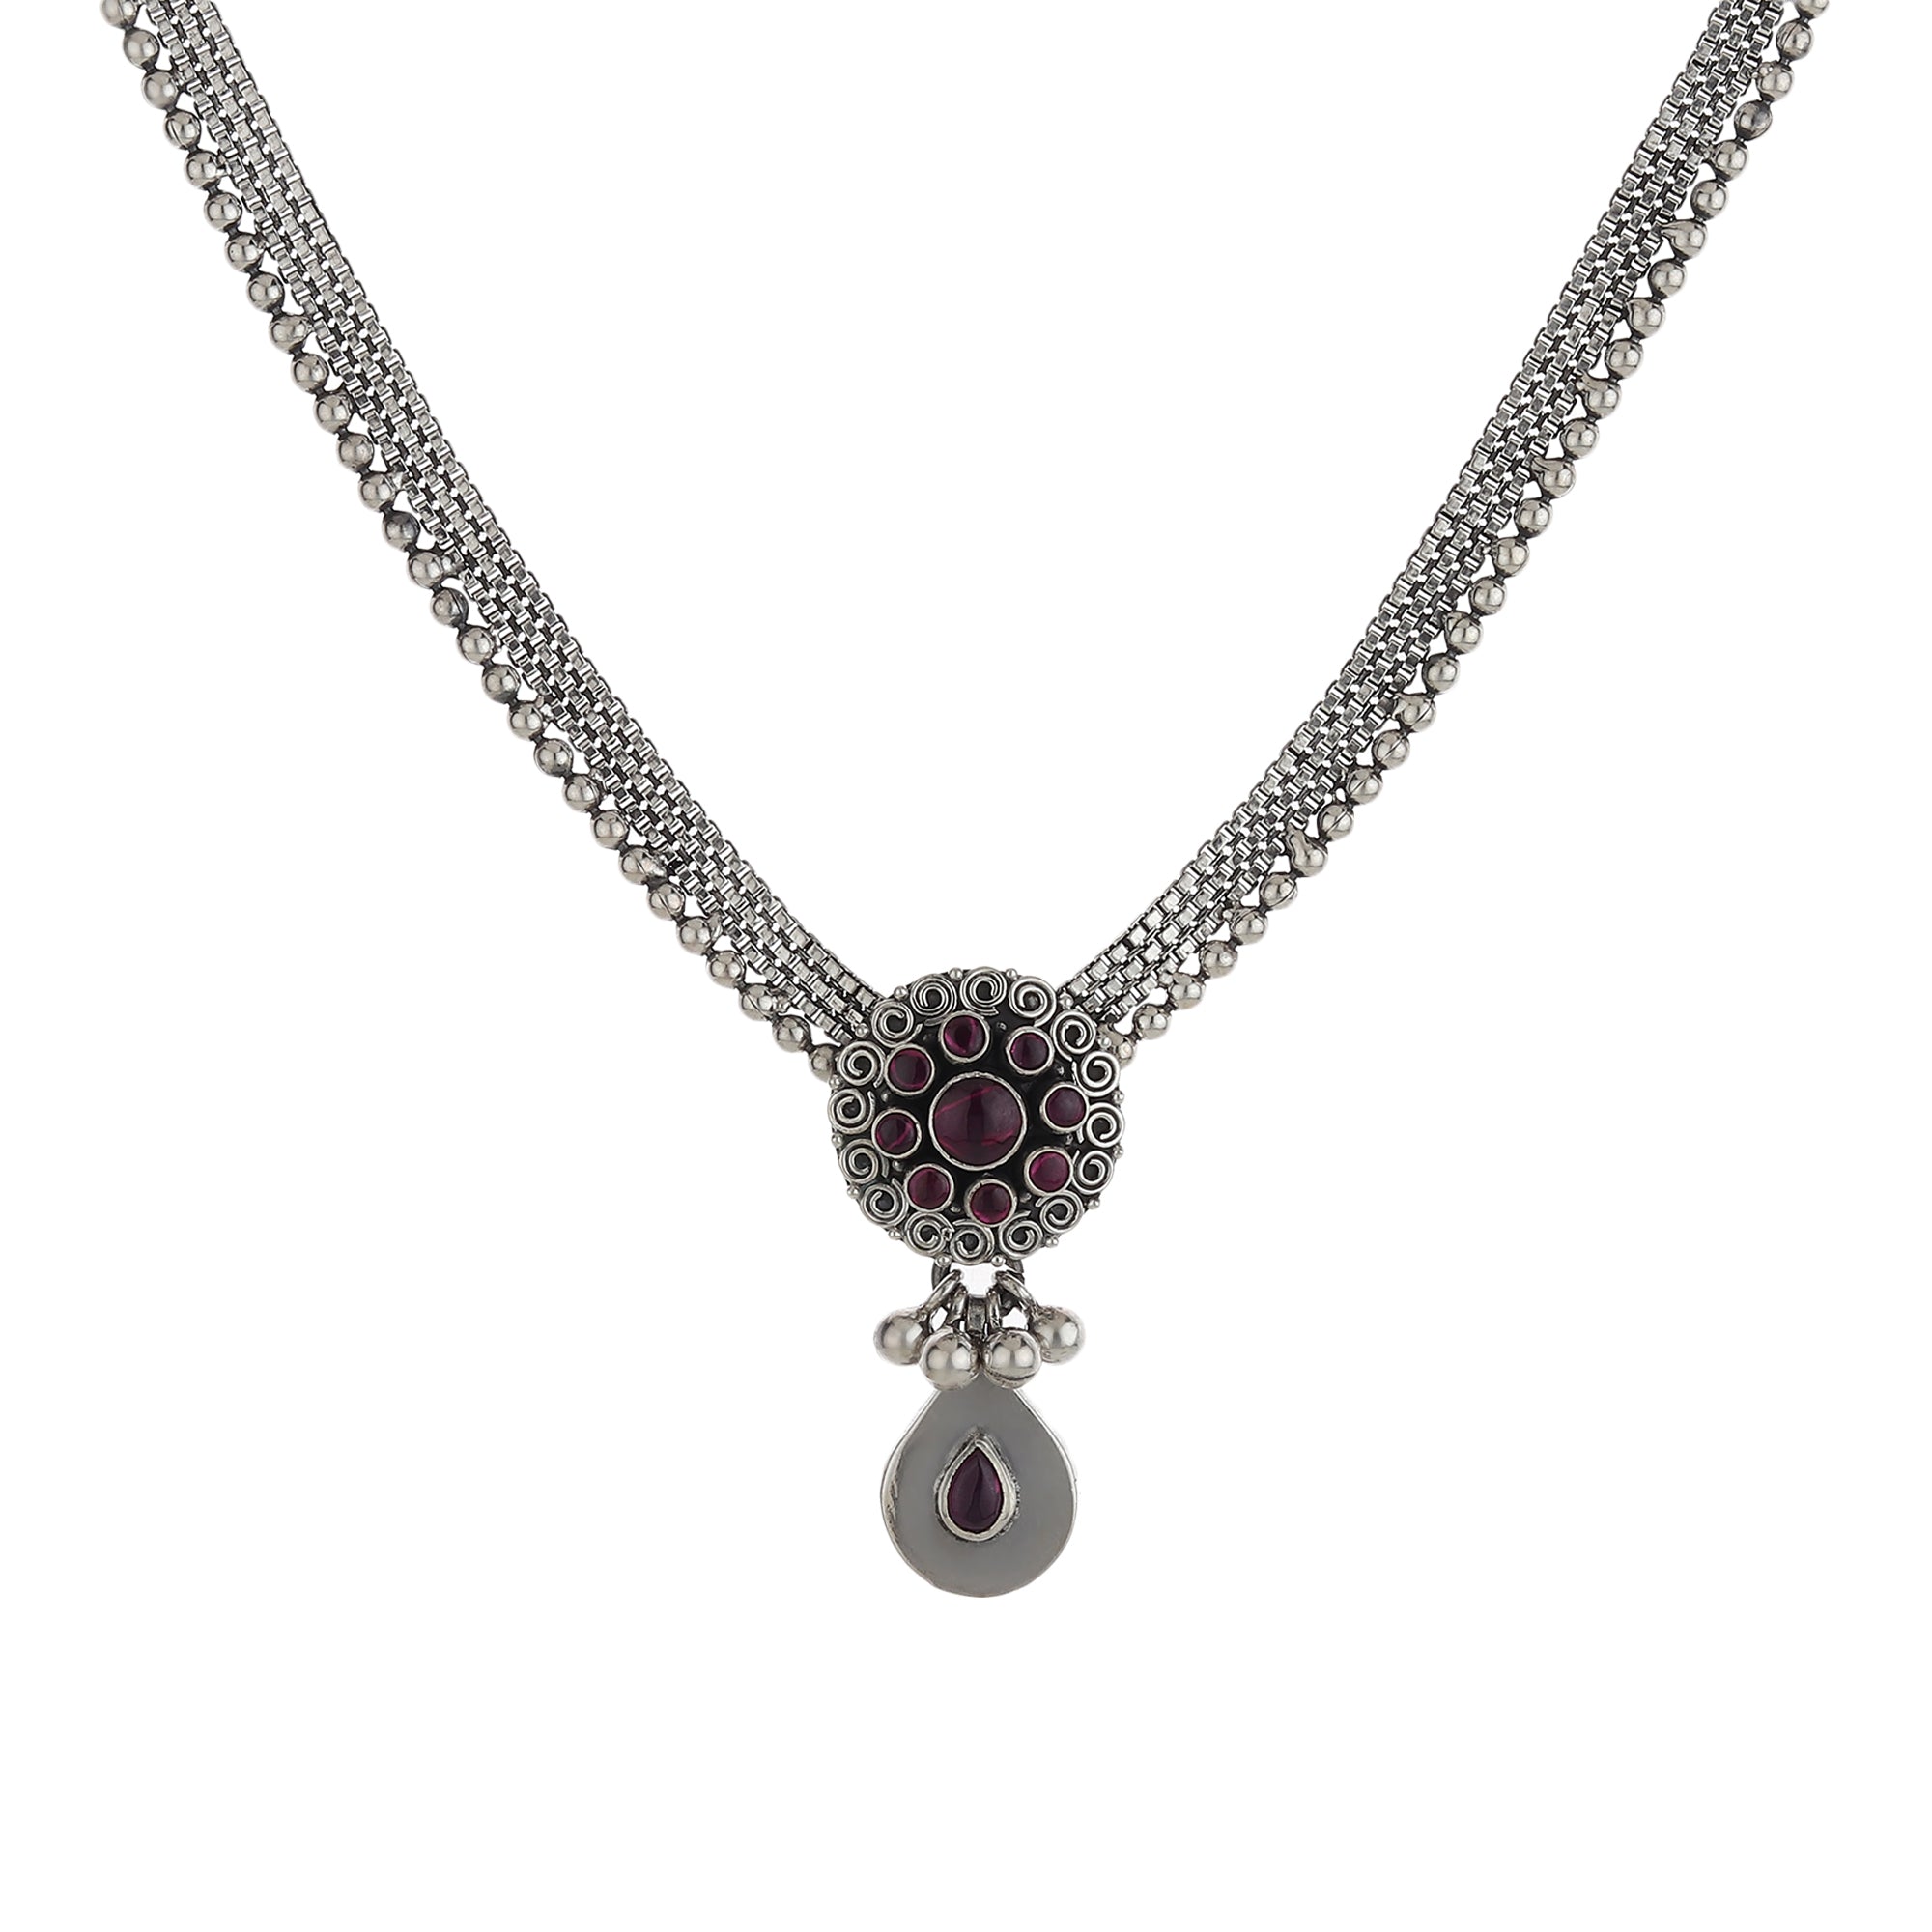 Silvermark -Antique Silver Chain Necklace